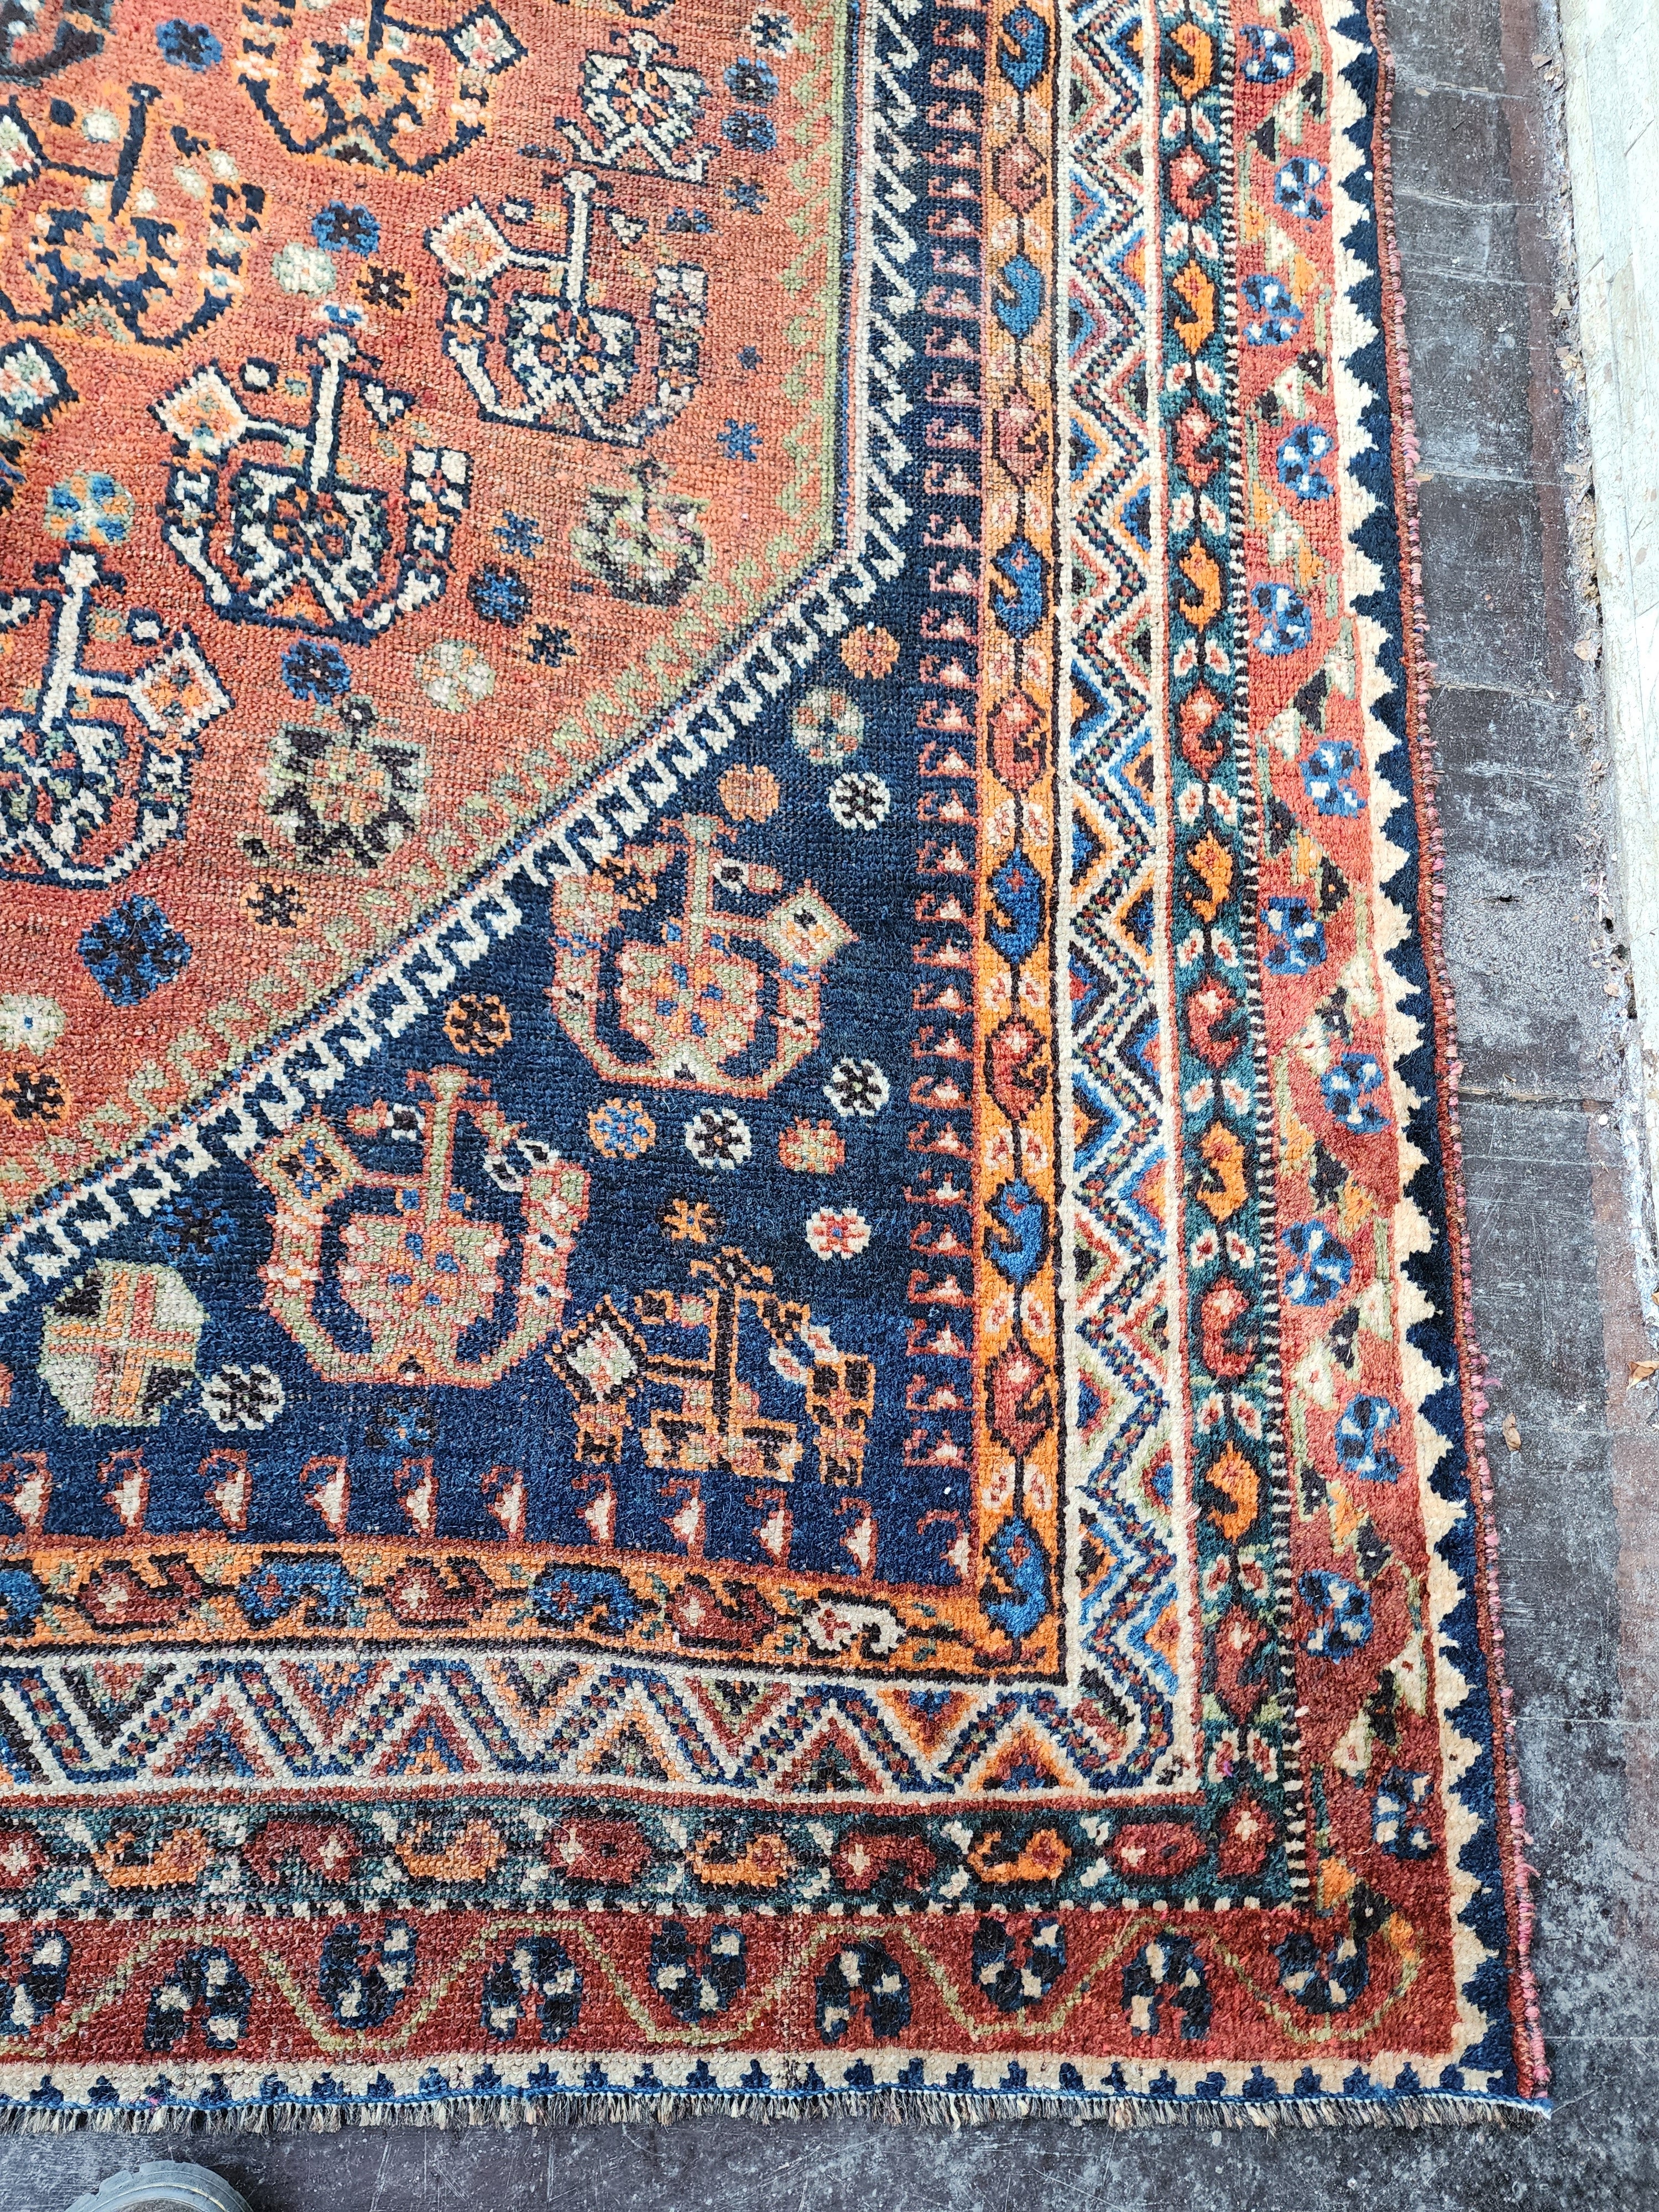 Vintage Persian Rug, 7 ft 9 in x 5 ft 5 in Red, Blue and White Large Turkish Carpet Handmade from Natural Wool